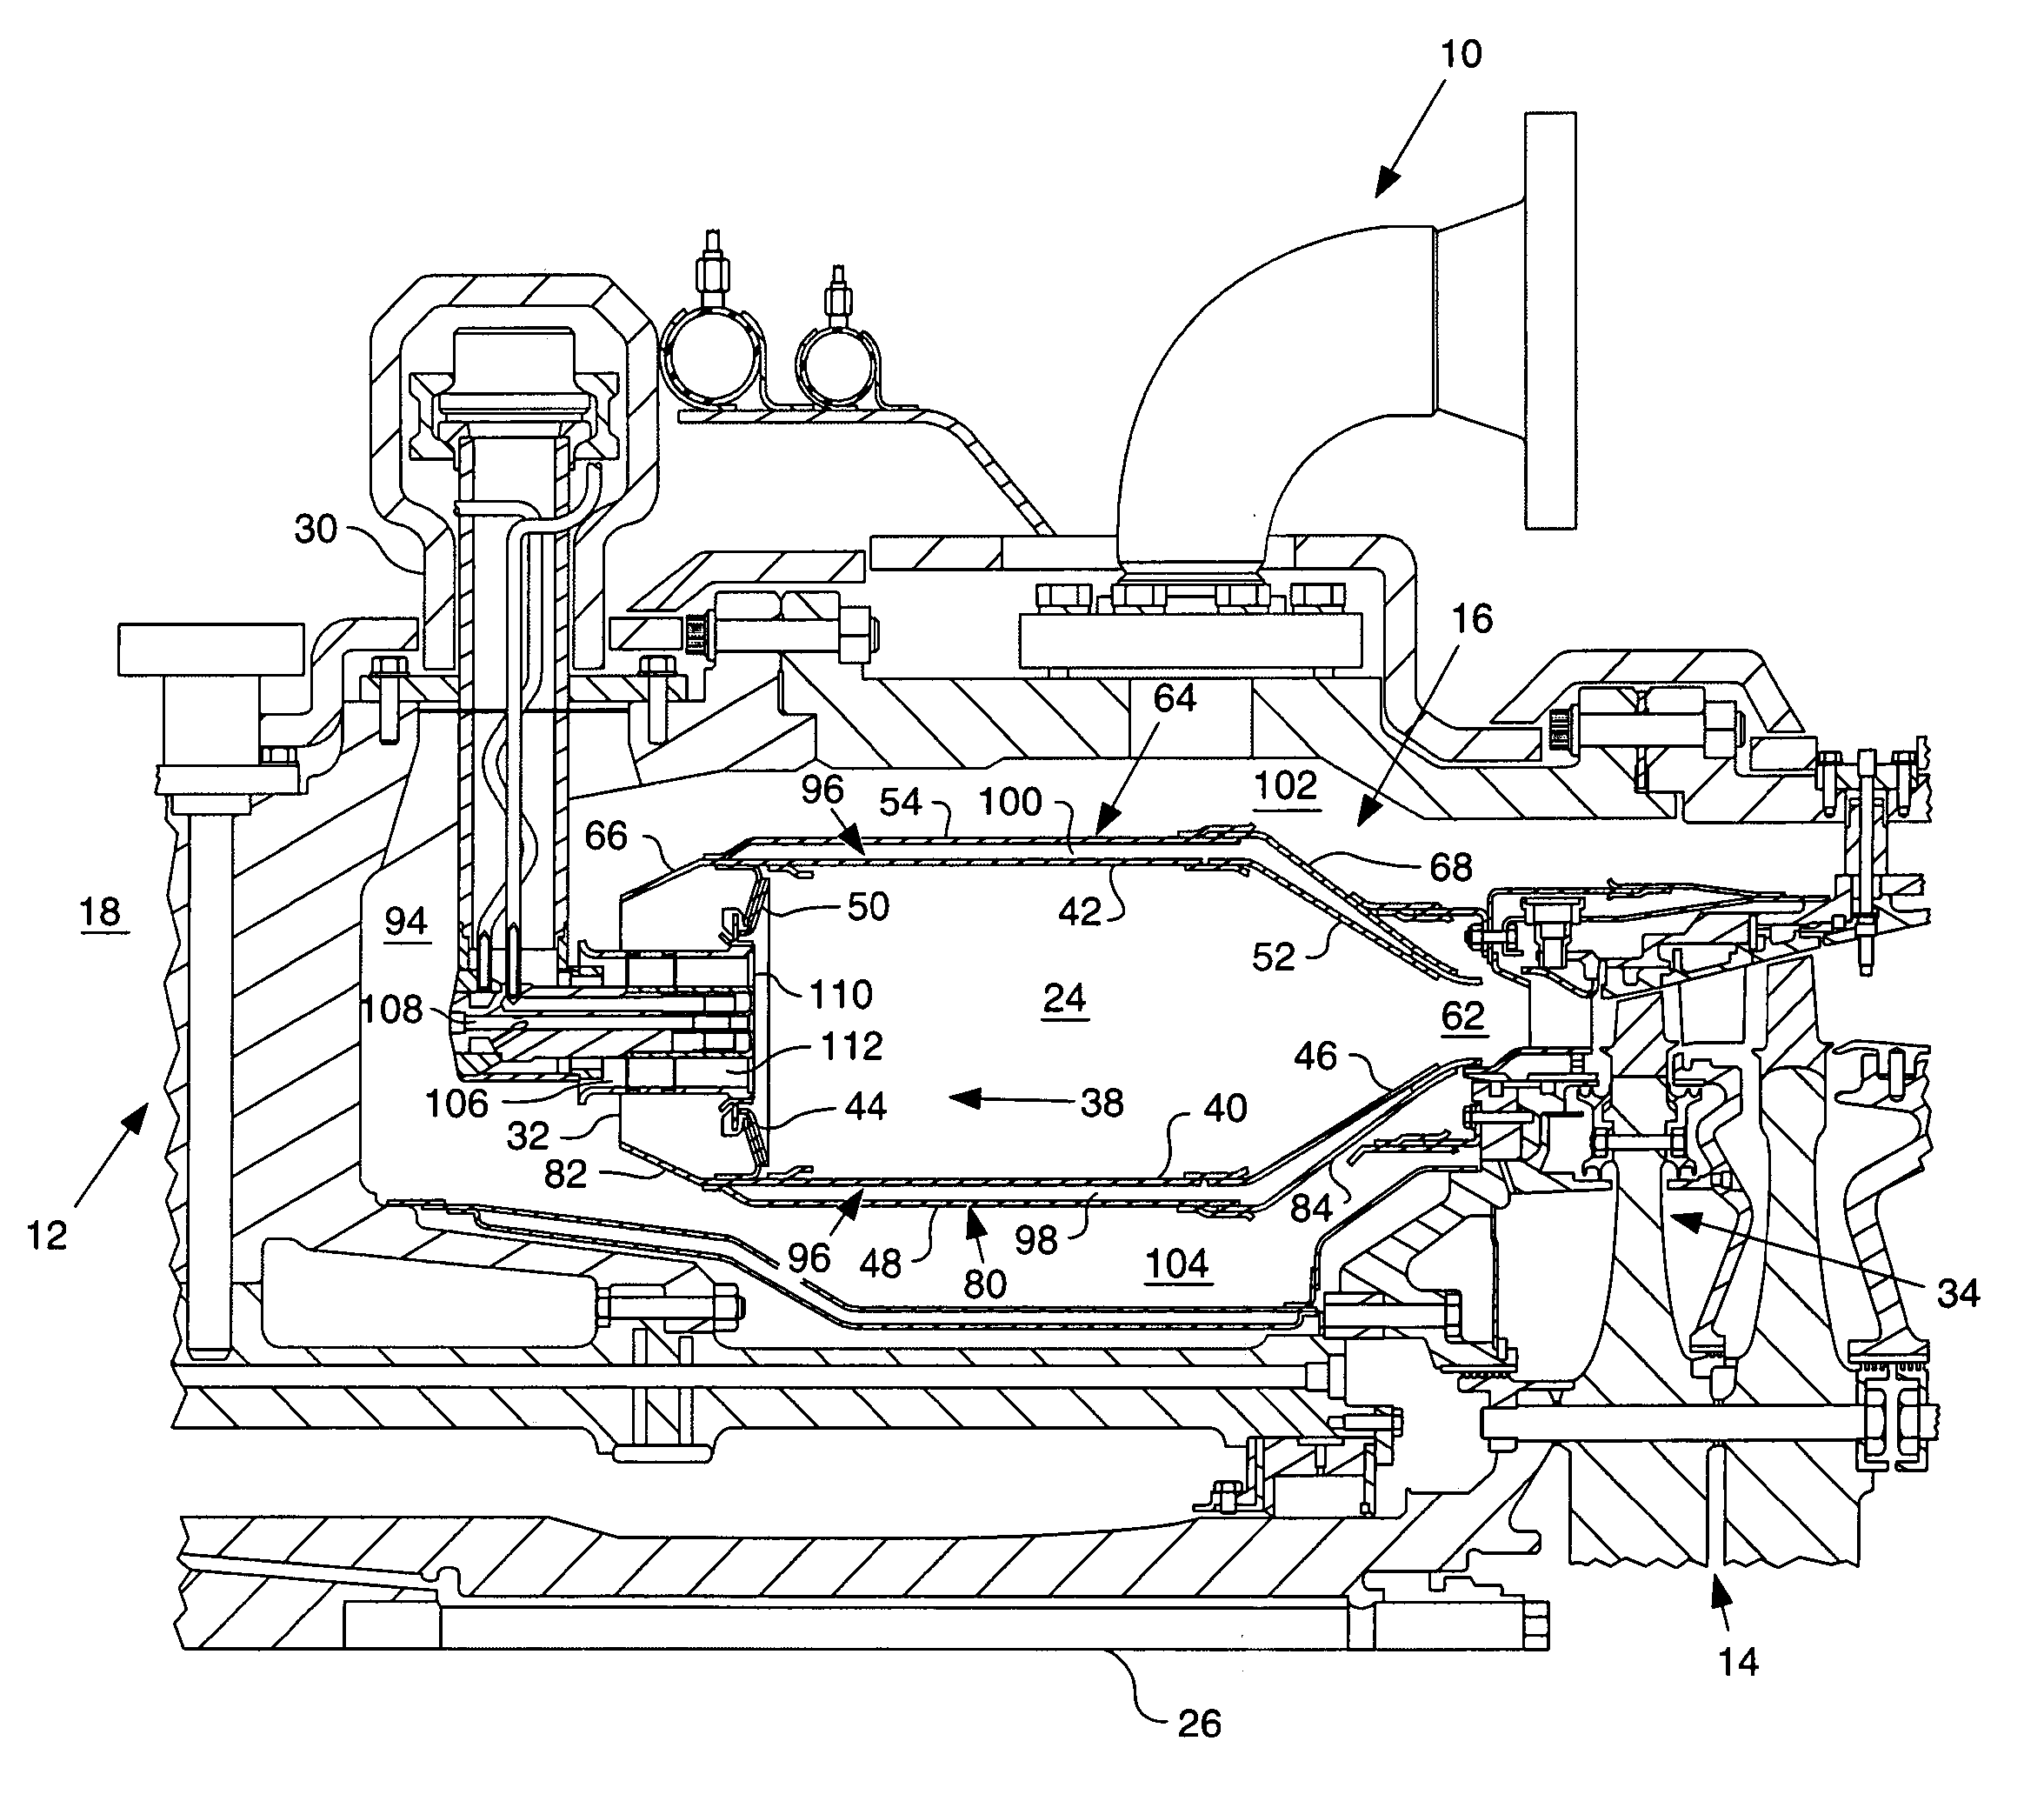 System and method for attenuating combustion oscillations in a gas turbine engine